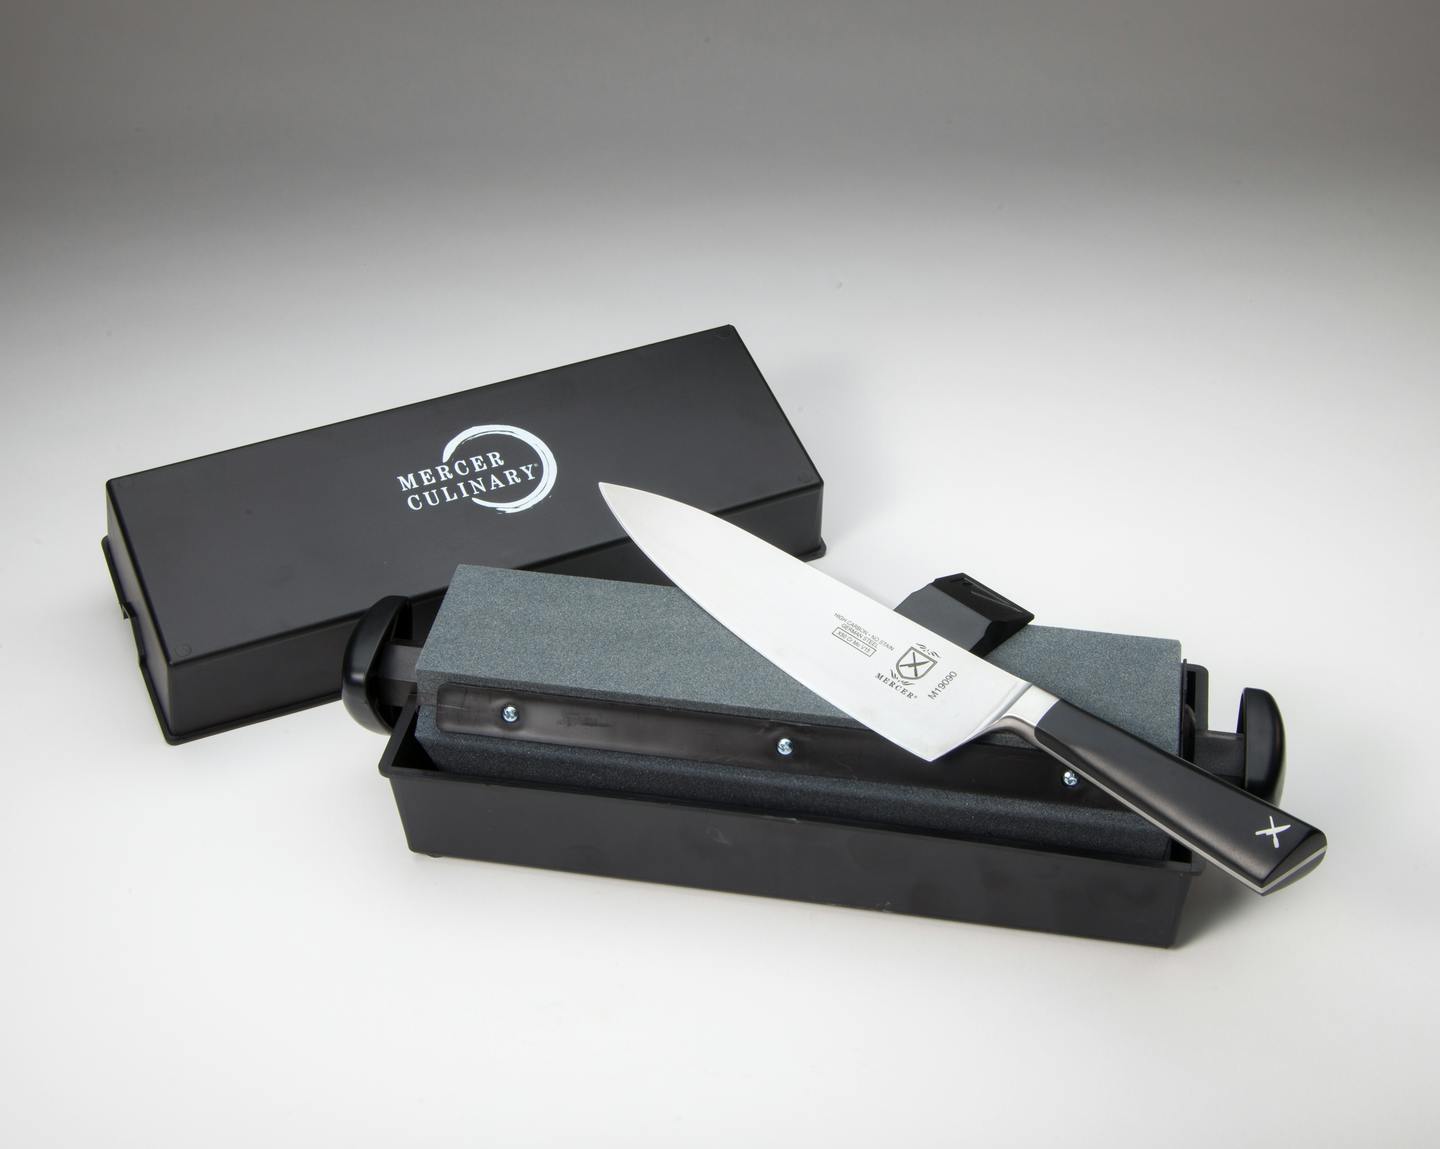 Mercer Culinary 3 Sharpening Stone Combination System